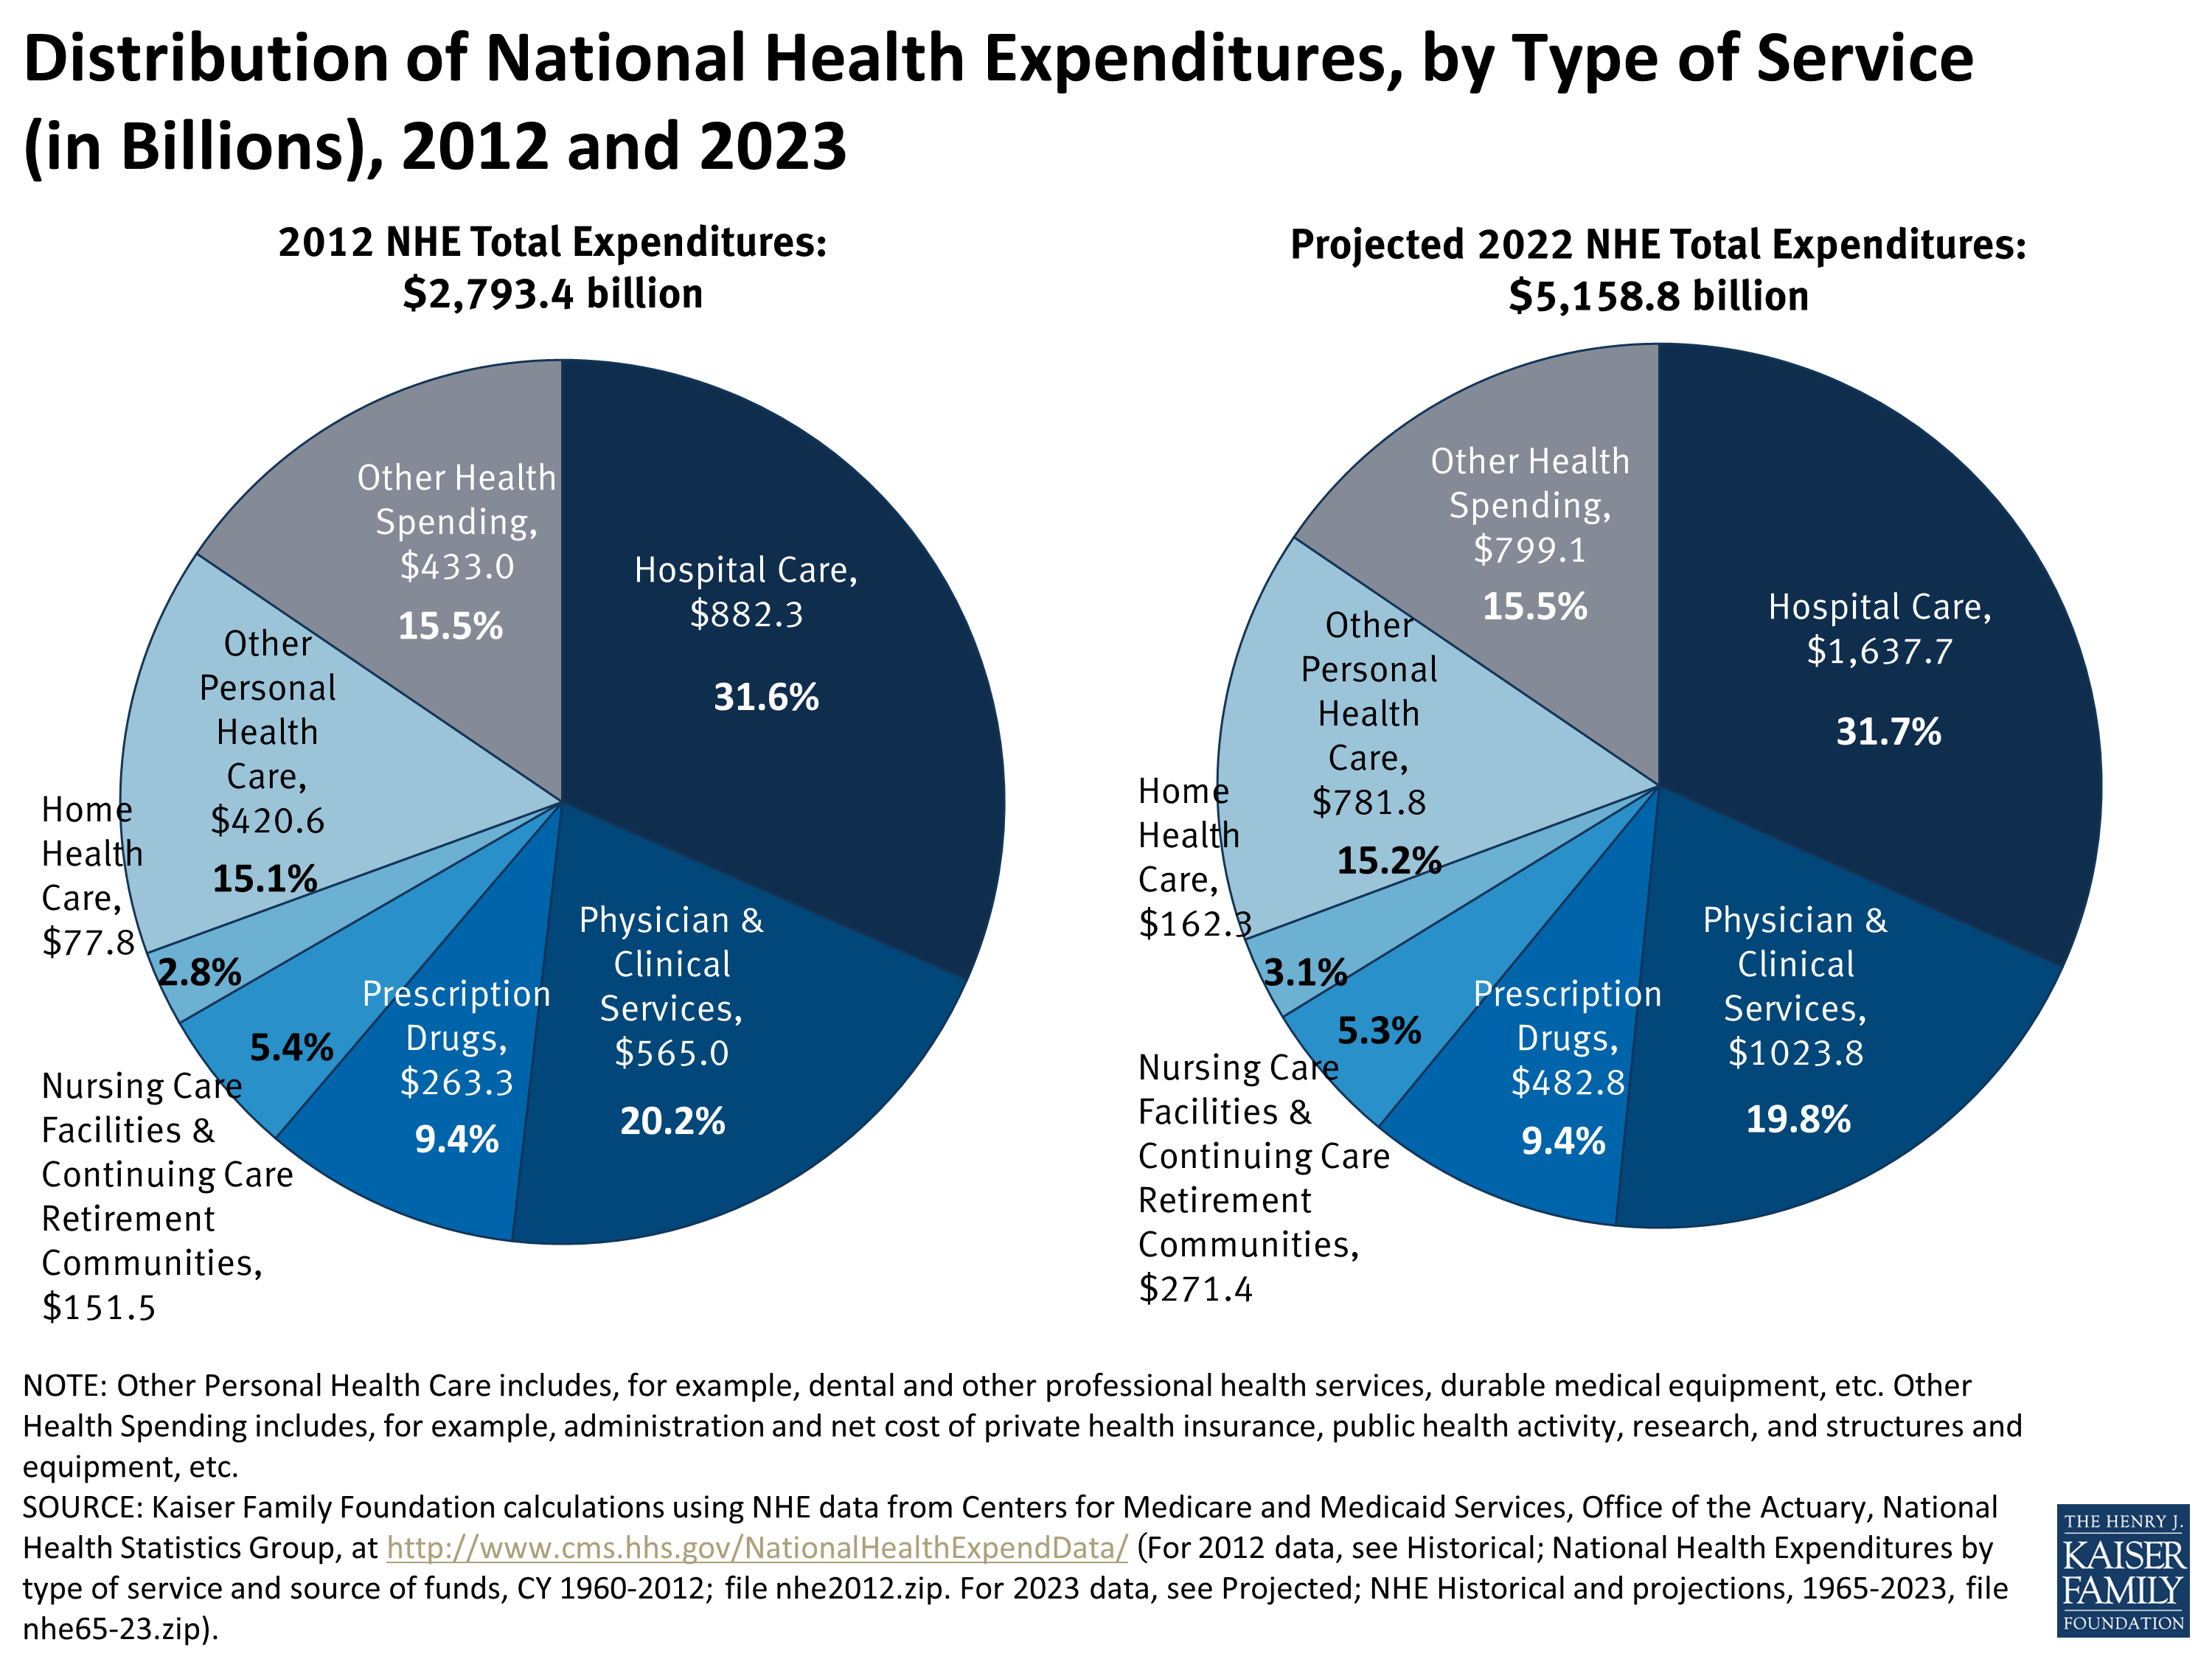 Distribution of National Health Expenditures, by Type of Service (in